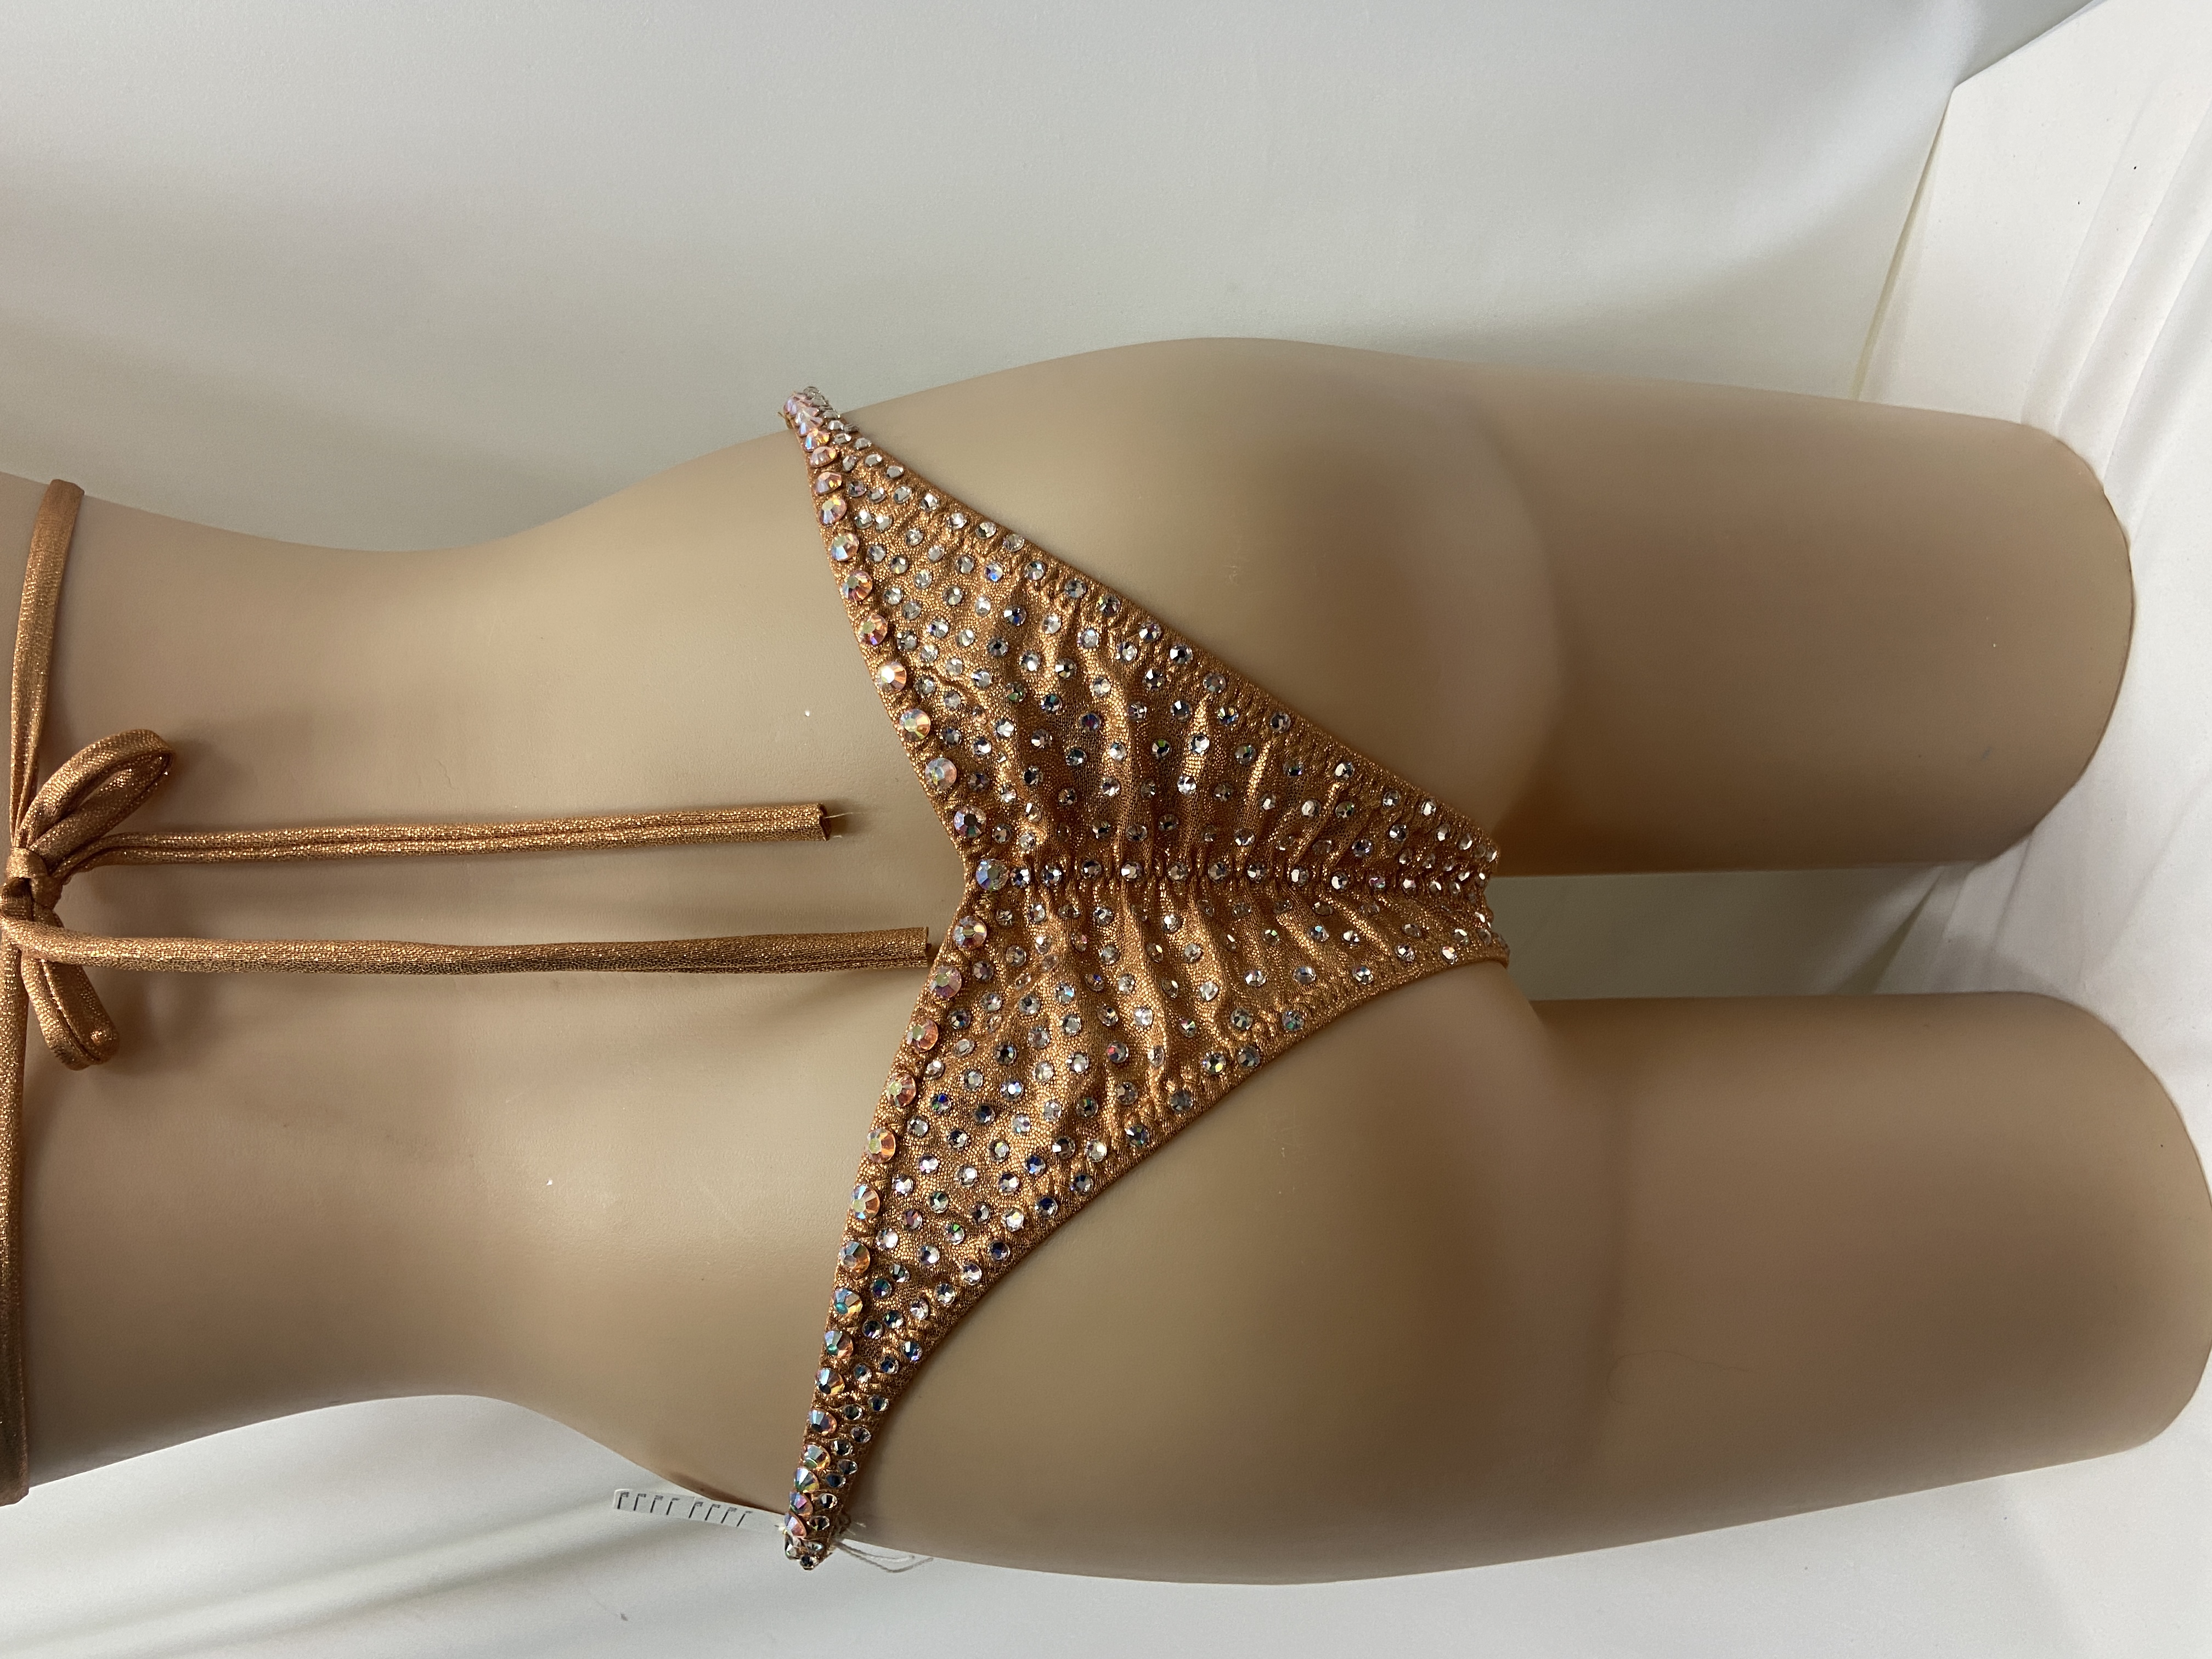 Nude Gold frost 
C slim sliding top 
medium front, xsmall V back
Sale $400 new ( was $550)
